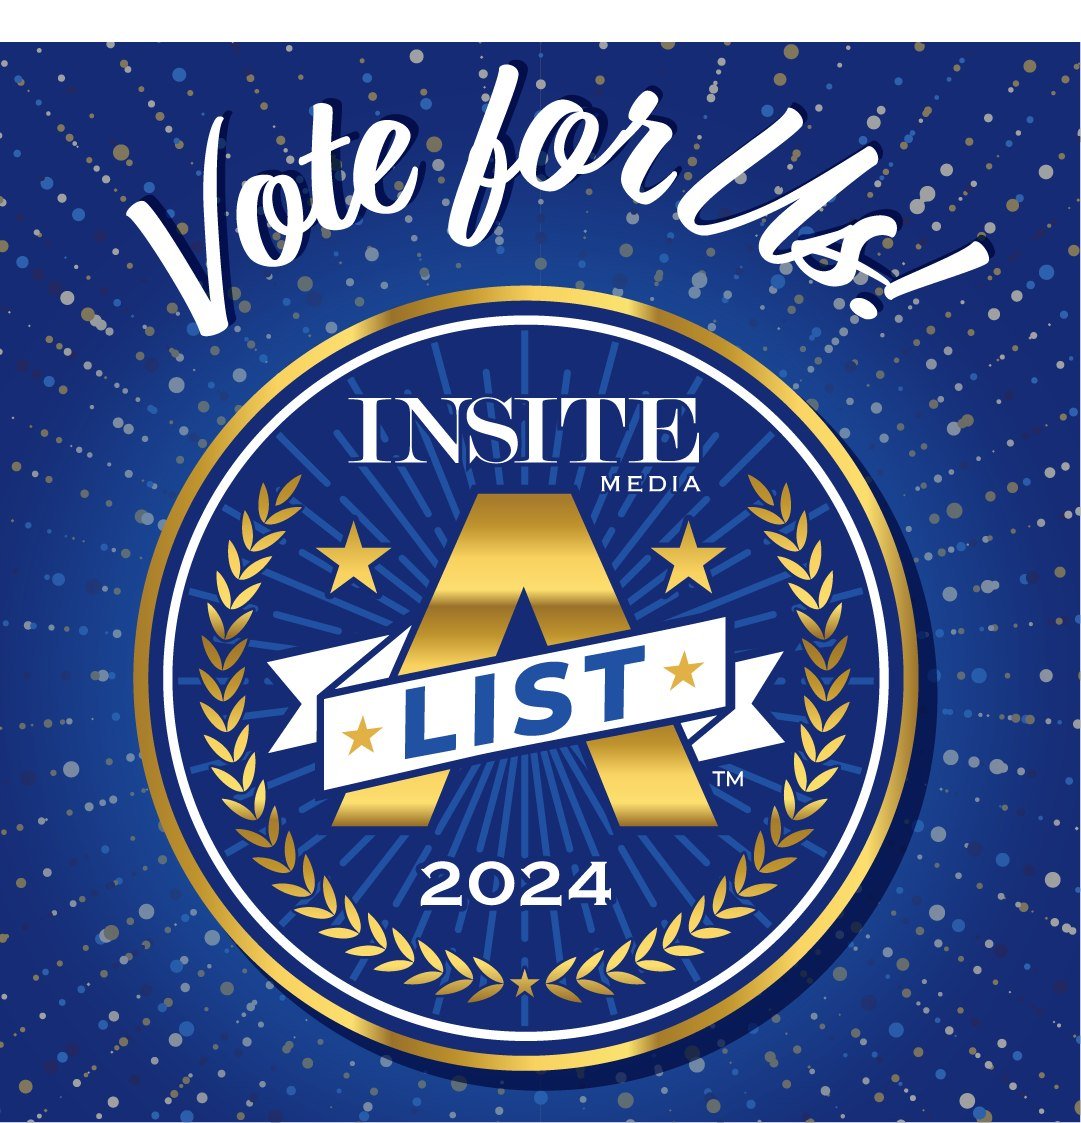 We made it! Saint Francis Wolf Sanctuary was nominated in the &quot;BEST ANIMAL NON-PROFIT&quot; category! 

The A-List contest is in the voting round, which is ongoing now! Just like the nominations round, each voter will be able to vote once per da